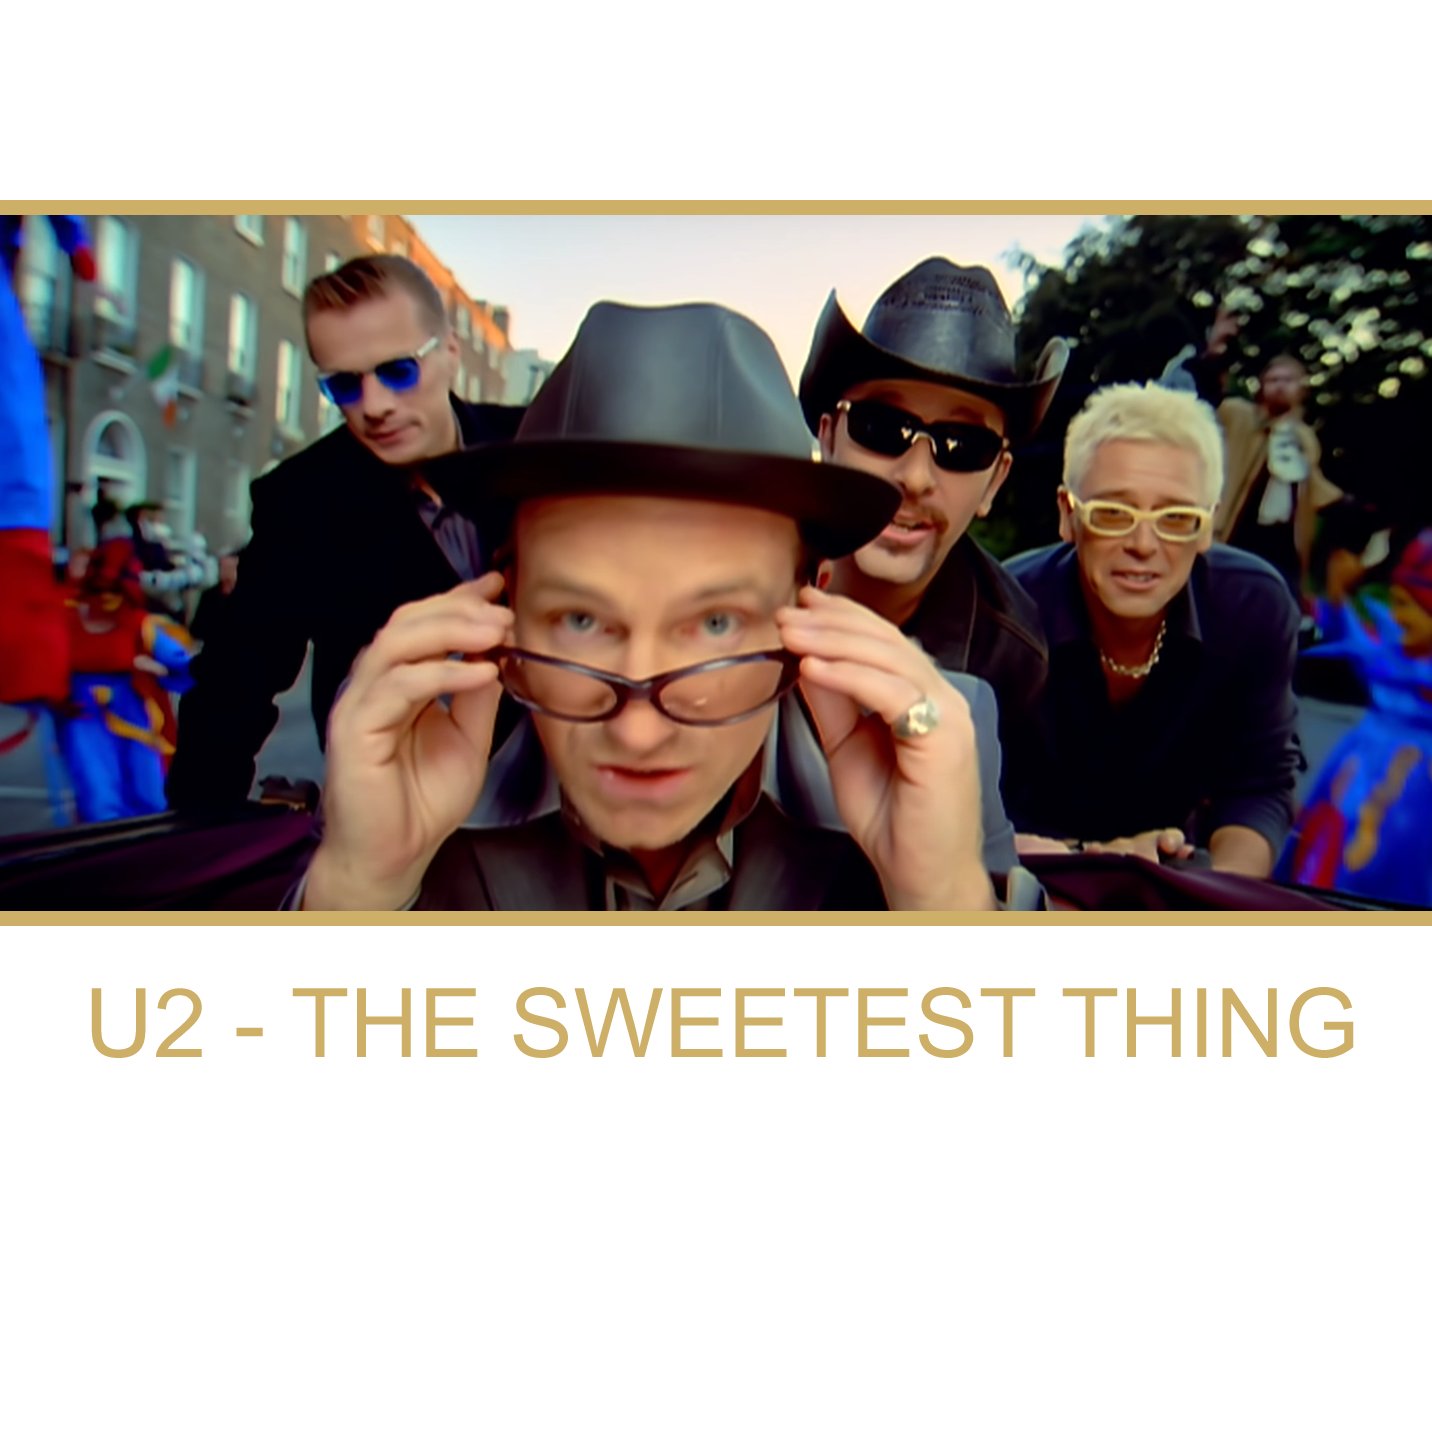 U2Songs.com on X: U2 updated The Sweetest Thing - available now